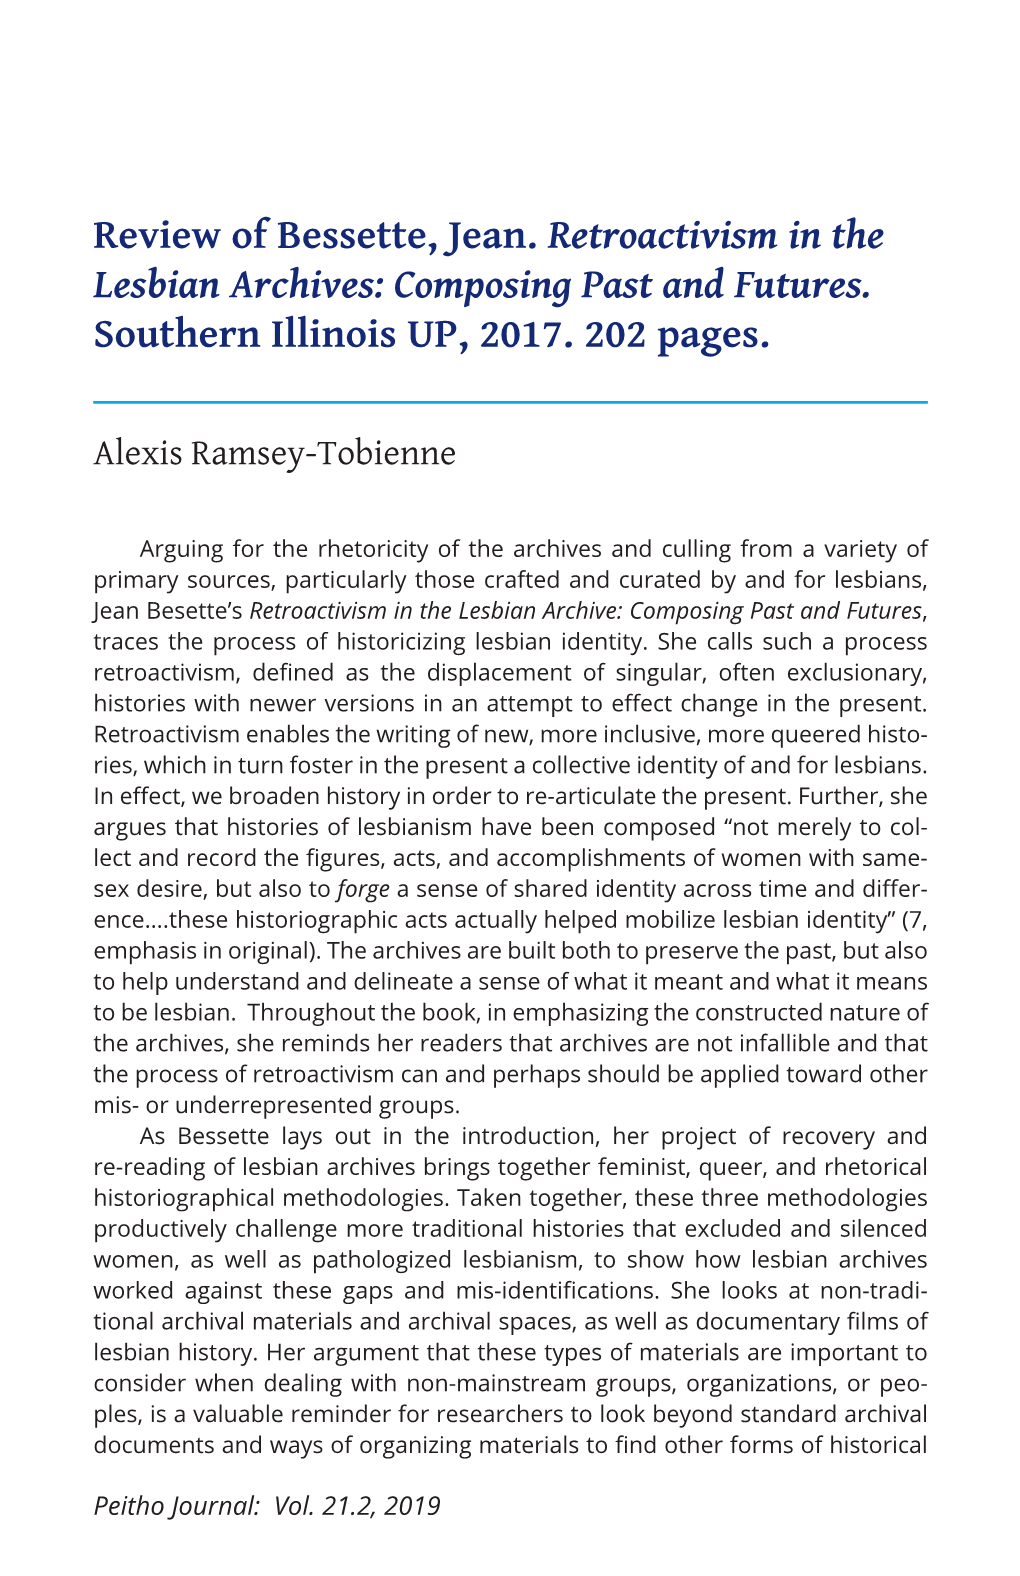 Review of Bessette, Jean. Retroactivism in the Lesbian Archives: Composing Past and Futures. Southern Illinois UP, 2017. 202 Pages